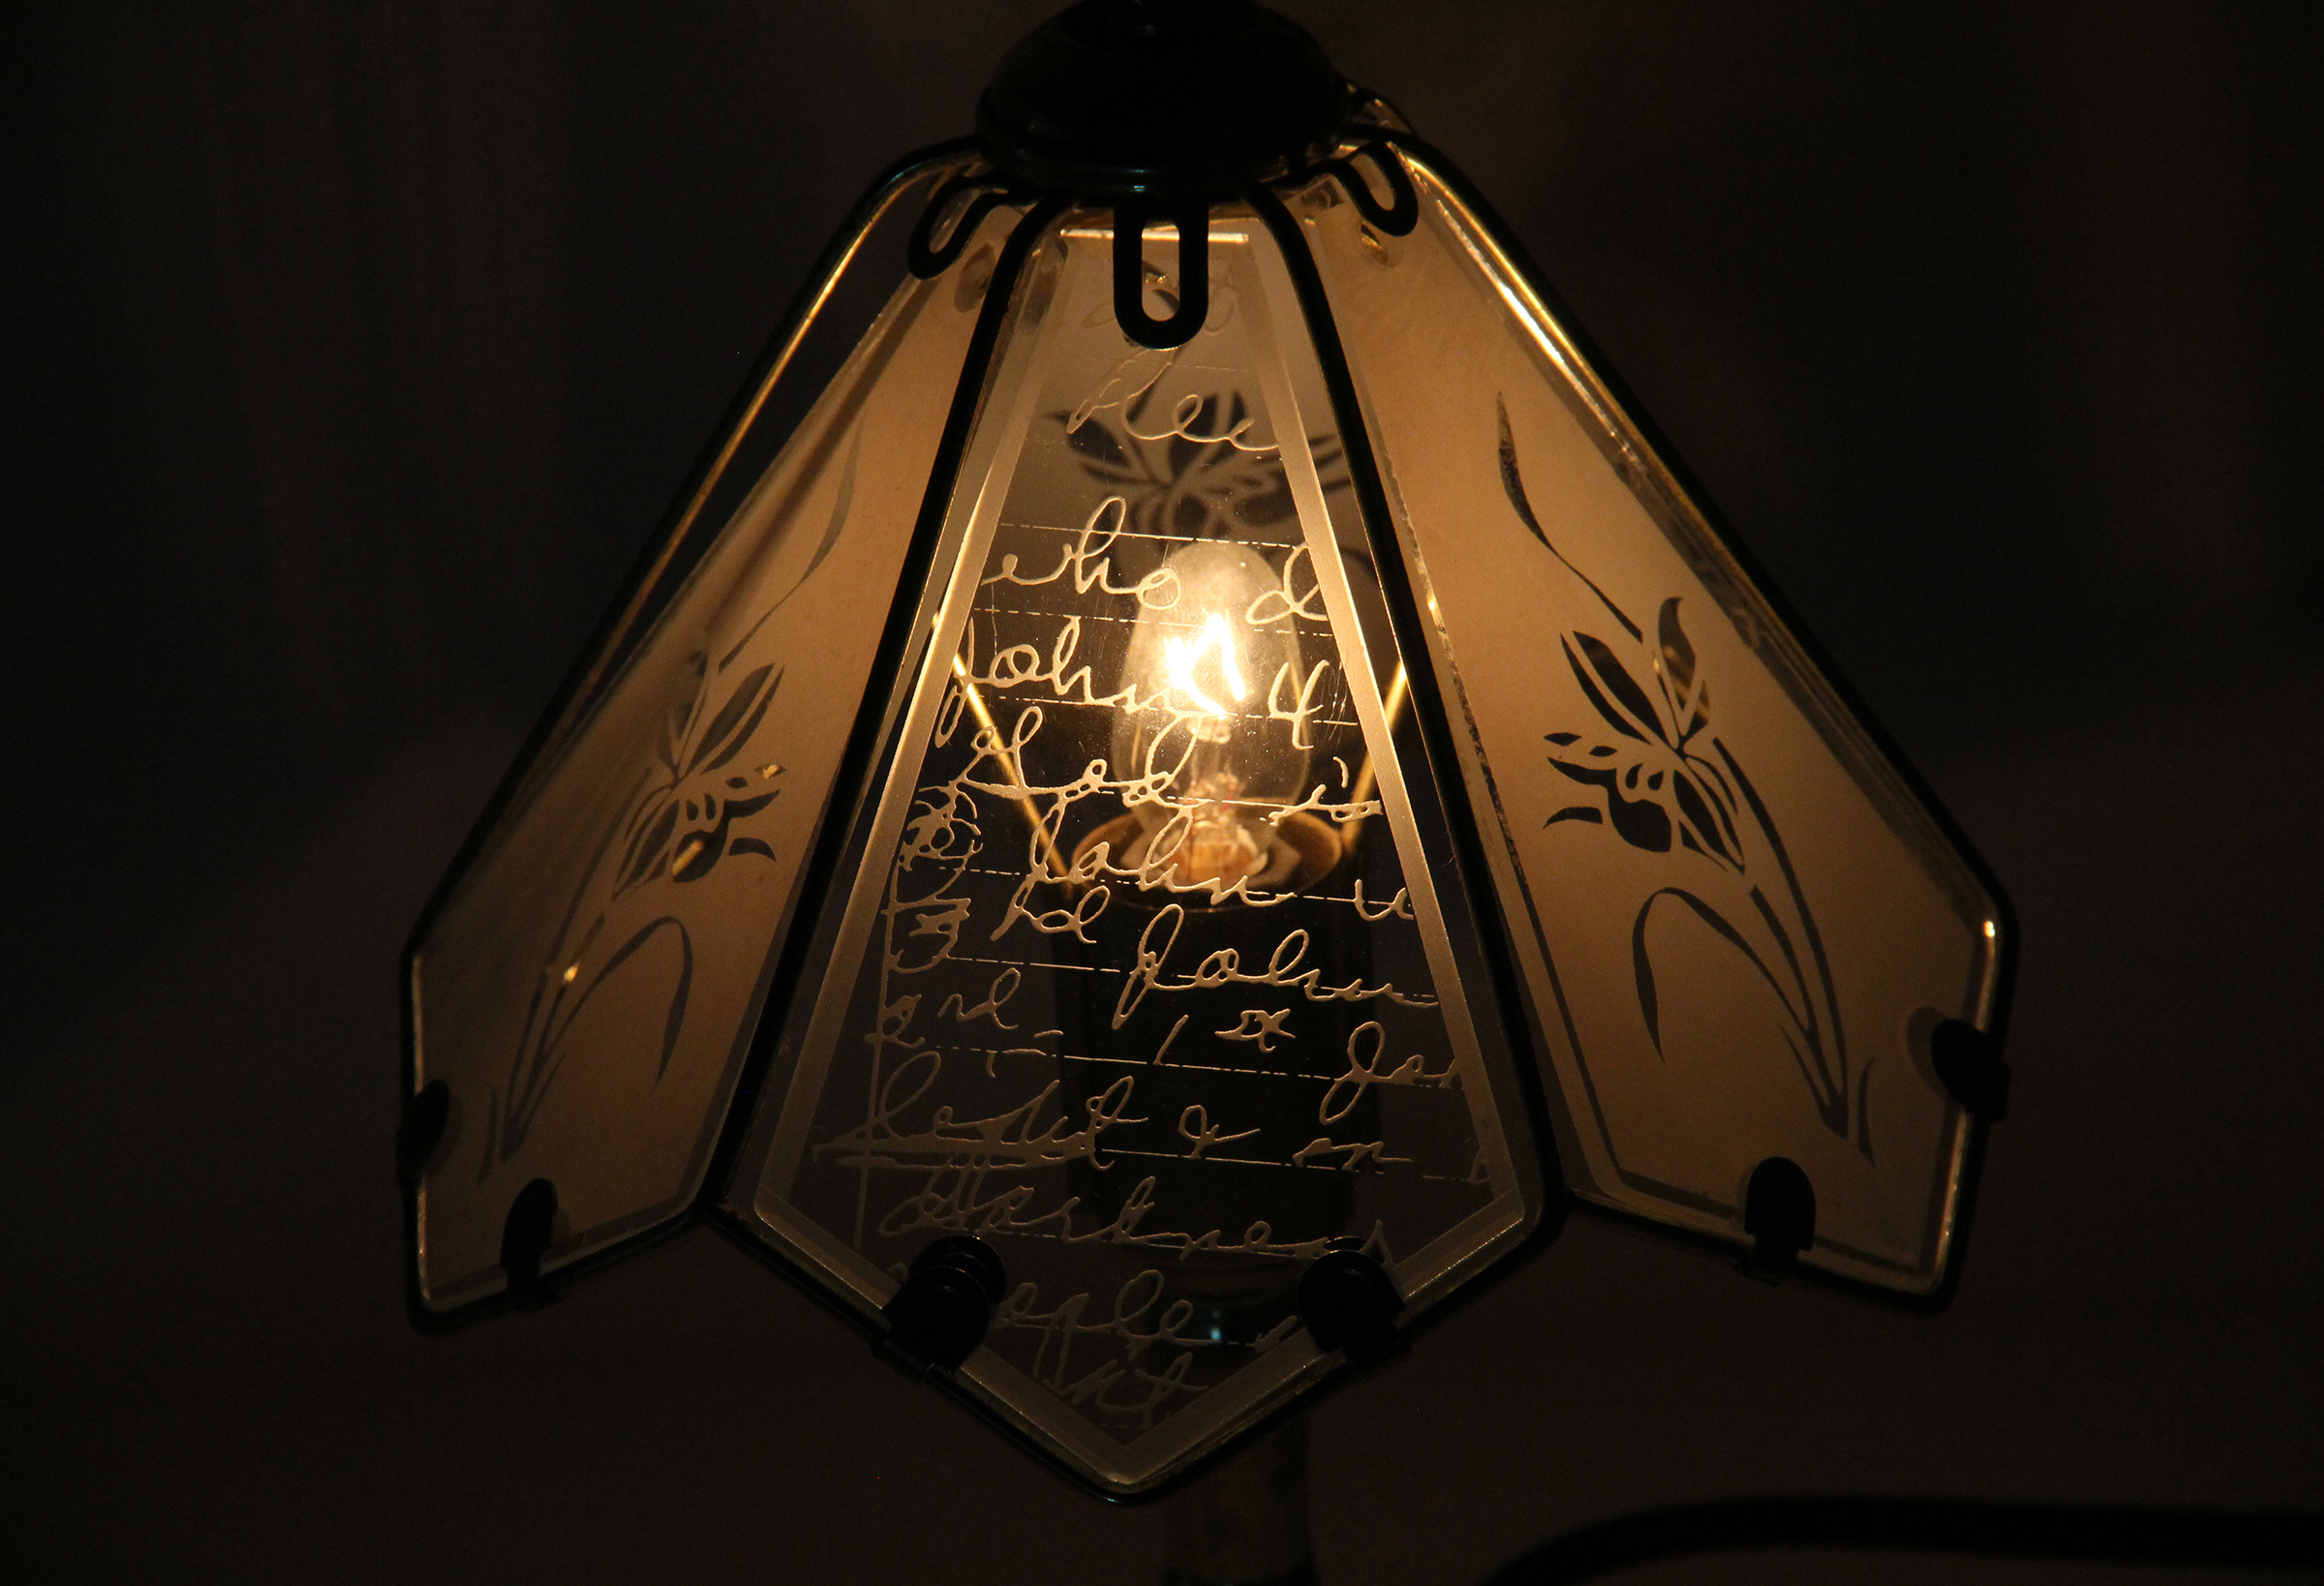 In God She Saw The Light detail, touch lamp with sandblasted sheet glass by Bre'Annah Stampley.